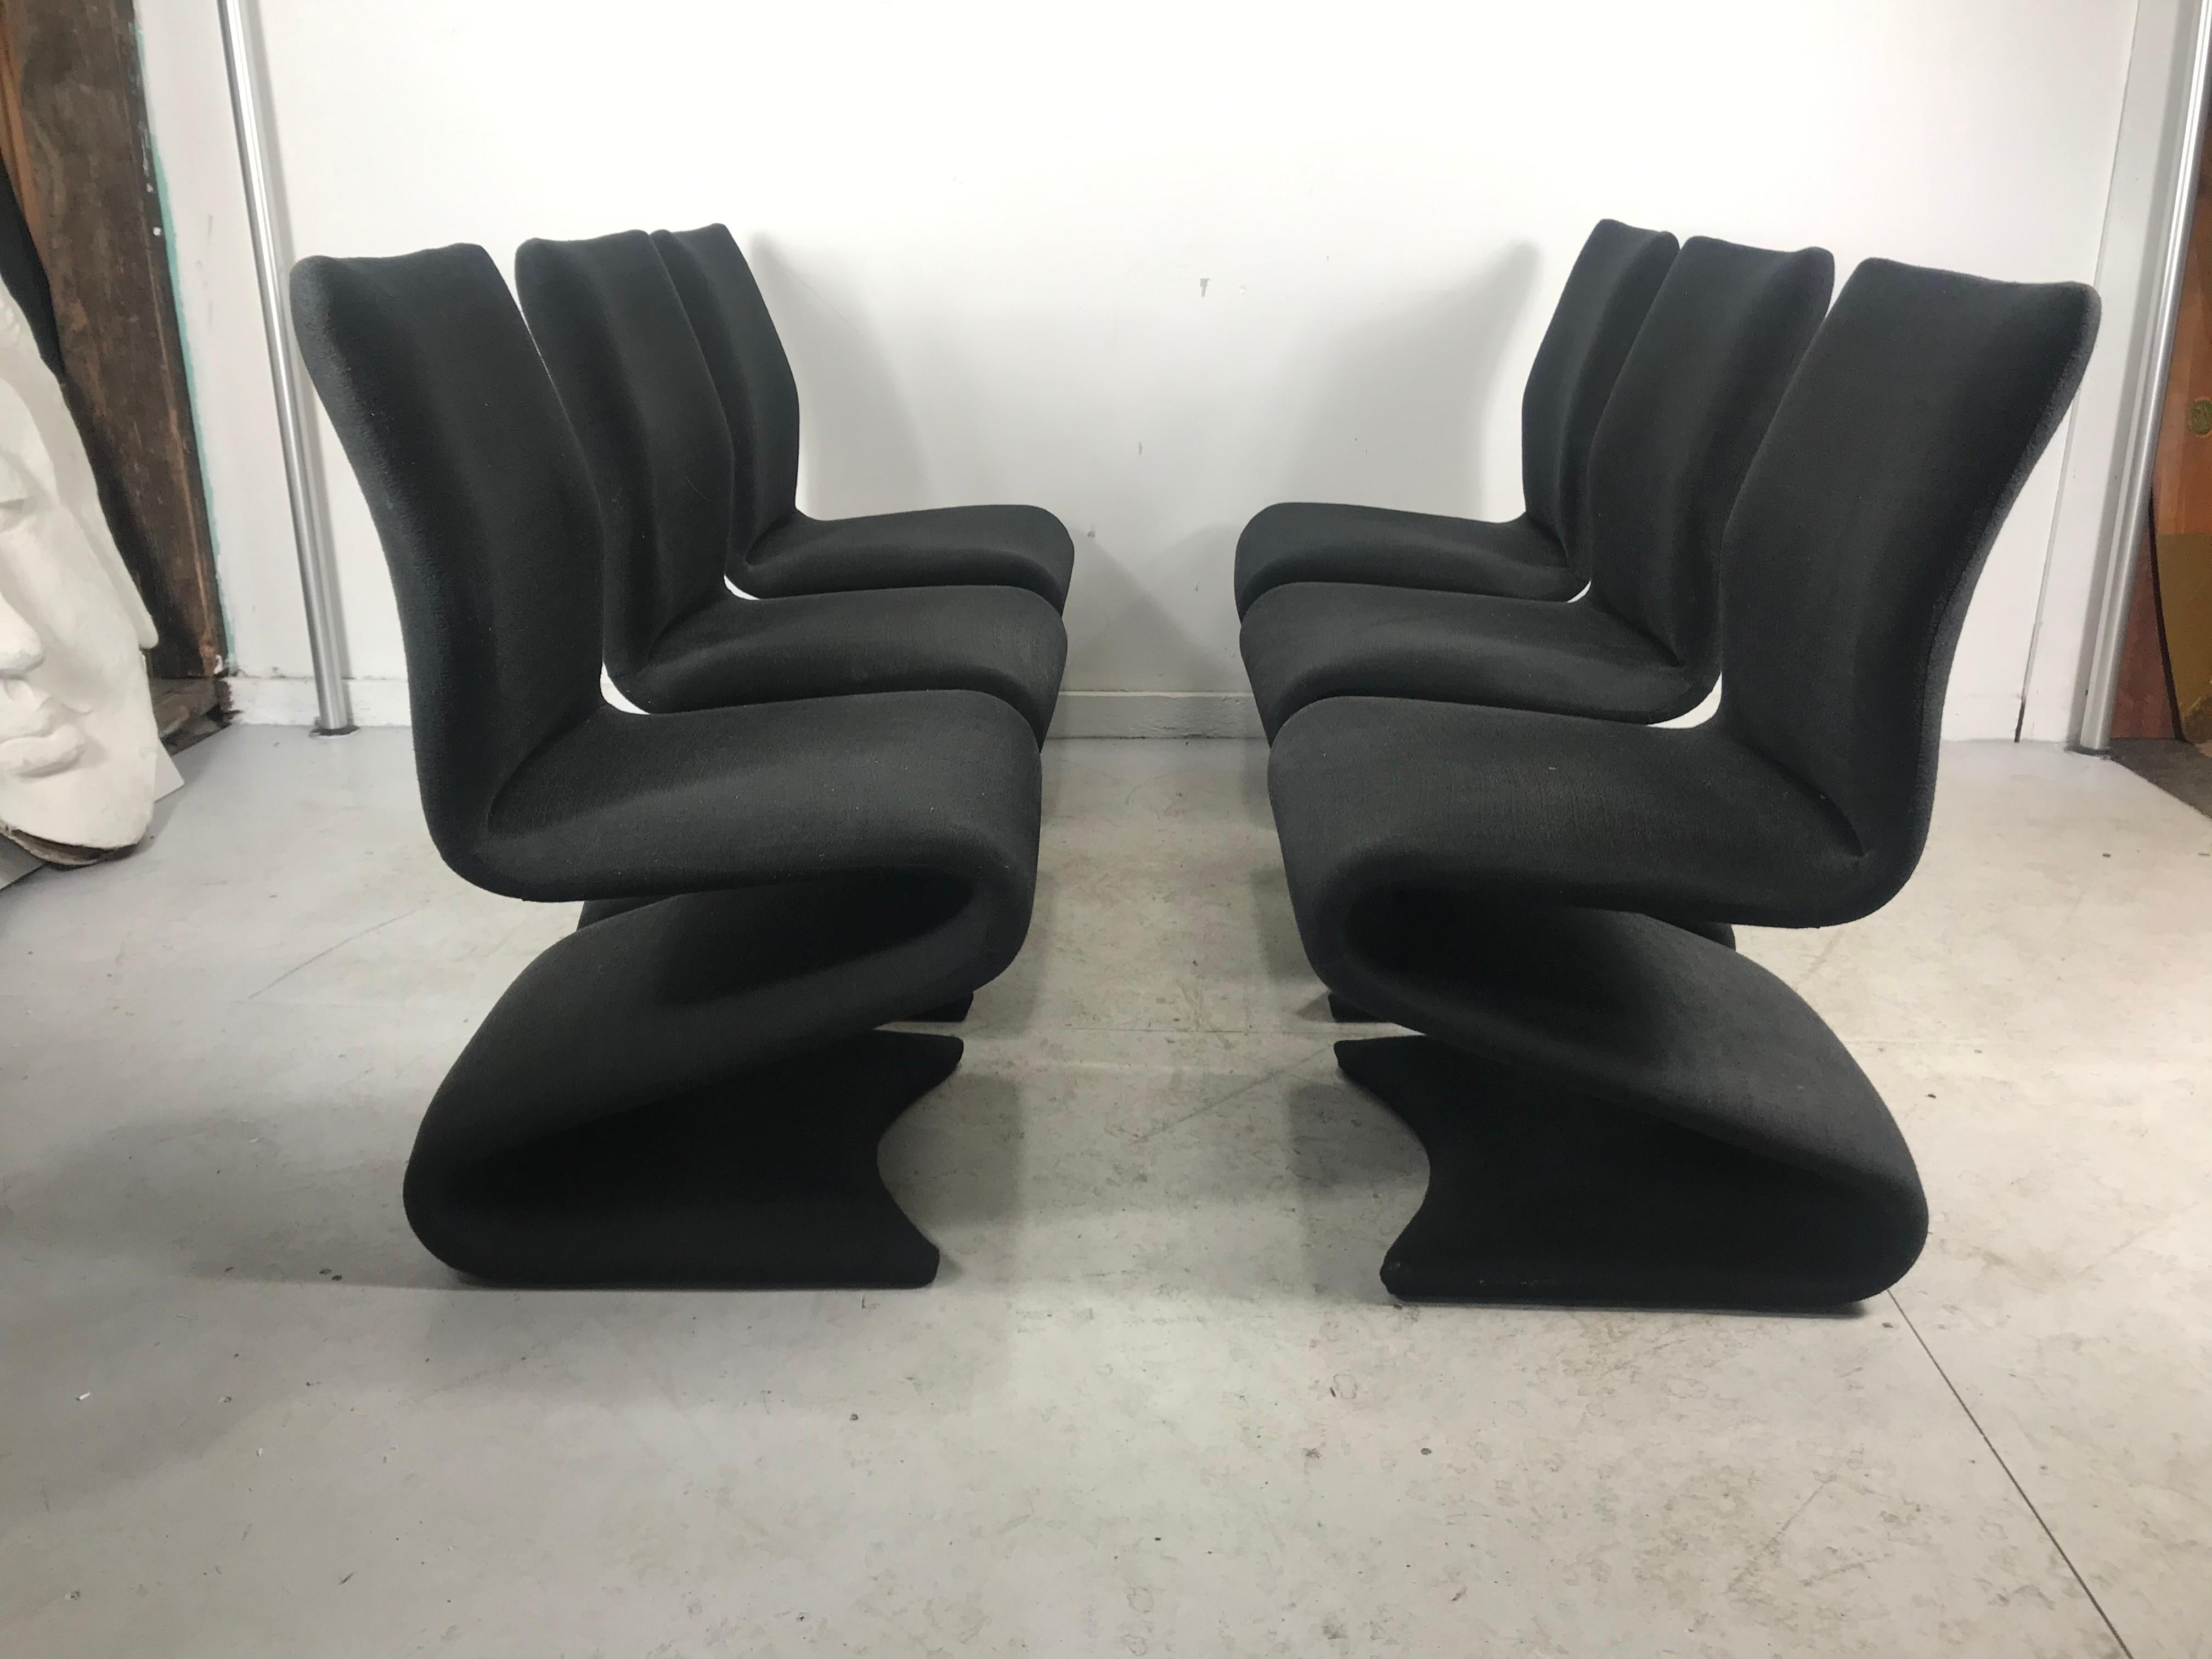 s shaped dining chairs